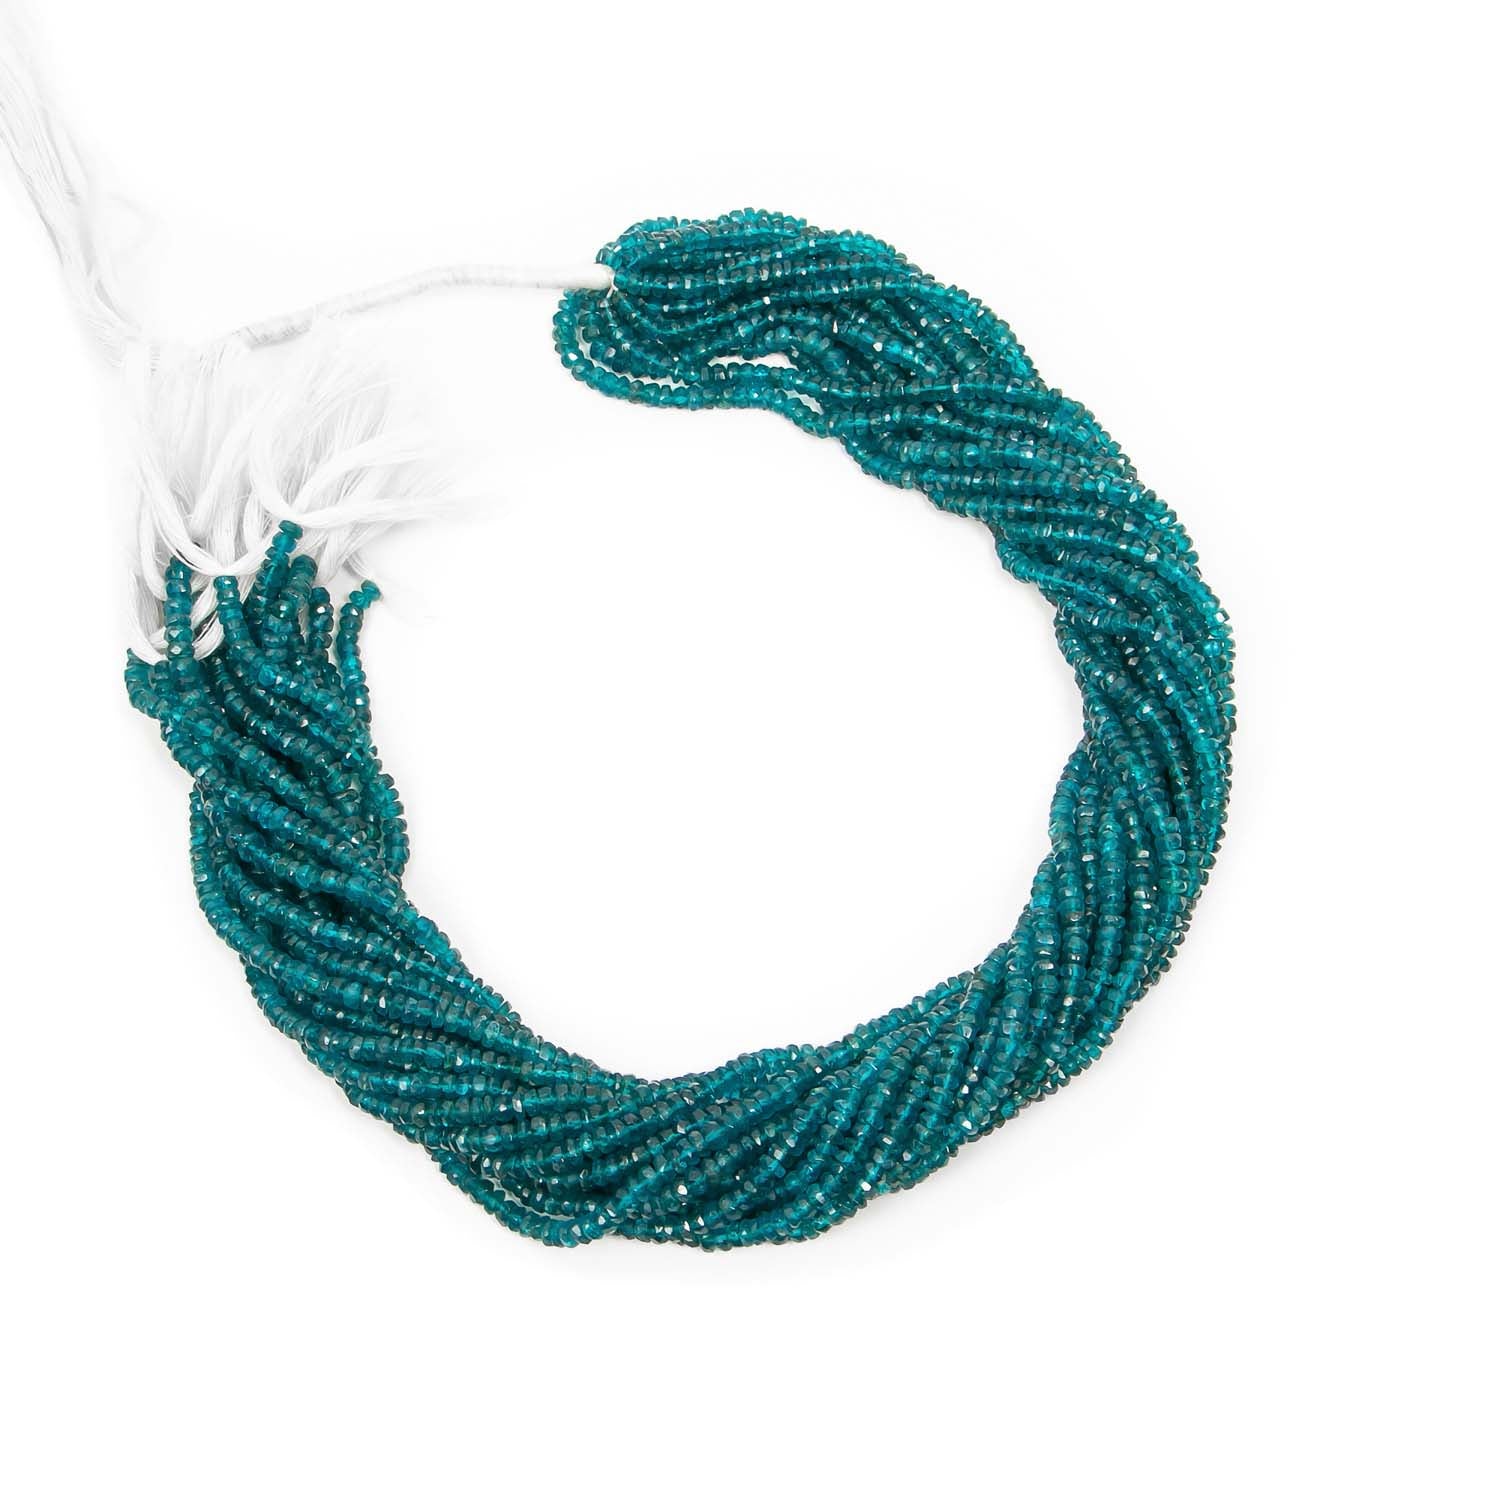 Neon Apatite Faceted Rondelle Beads, Gemstone Rondelle Beads, Wholesale Beads